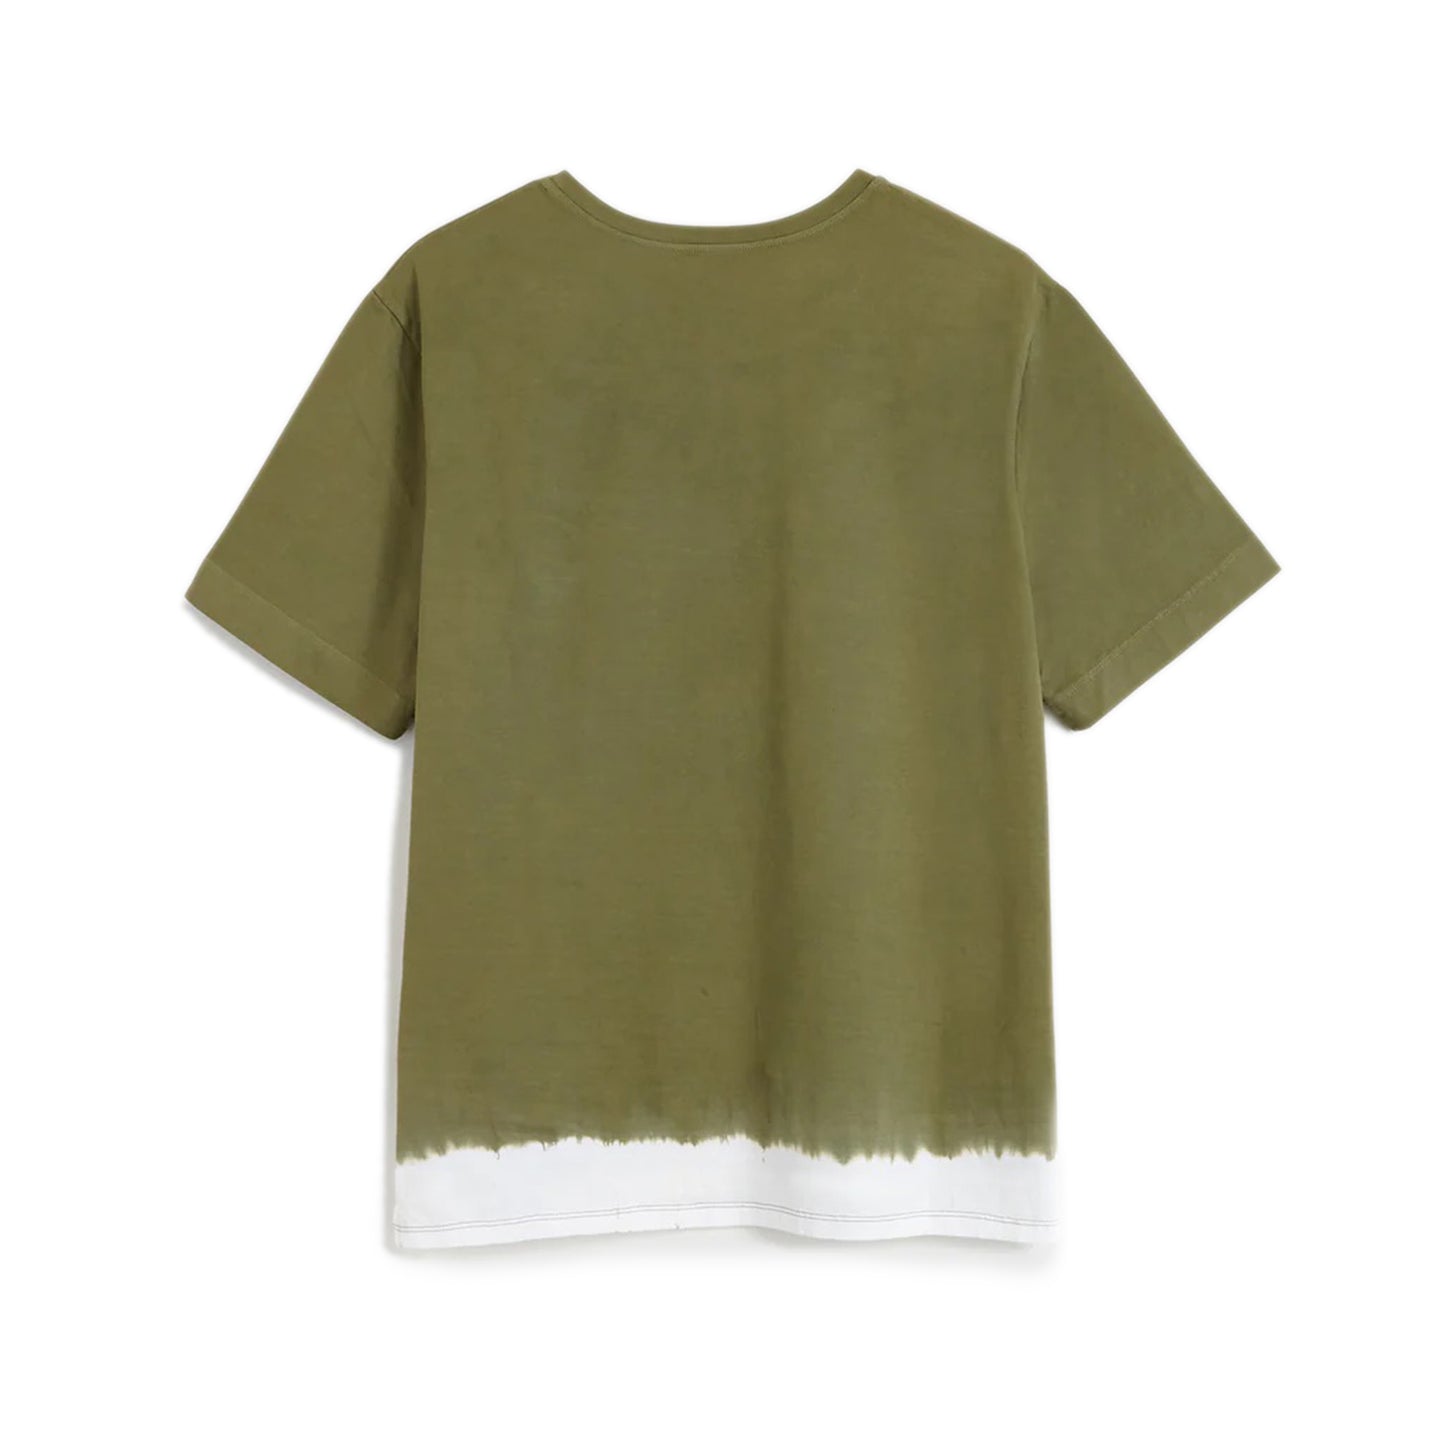 VICTOR T-SHIRT Medium Green crewneck t-shirt Hand dyed cotton jersey Chest pocket with embroidered artwork Composition: 100% cotton Dry clean Country of origin: Italy